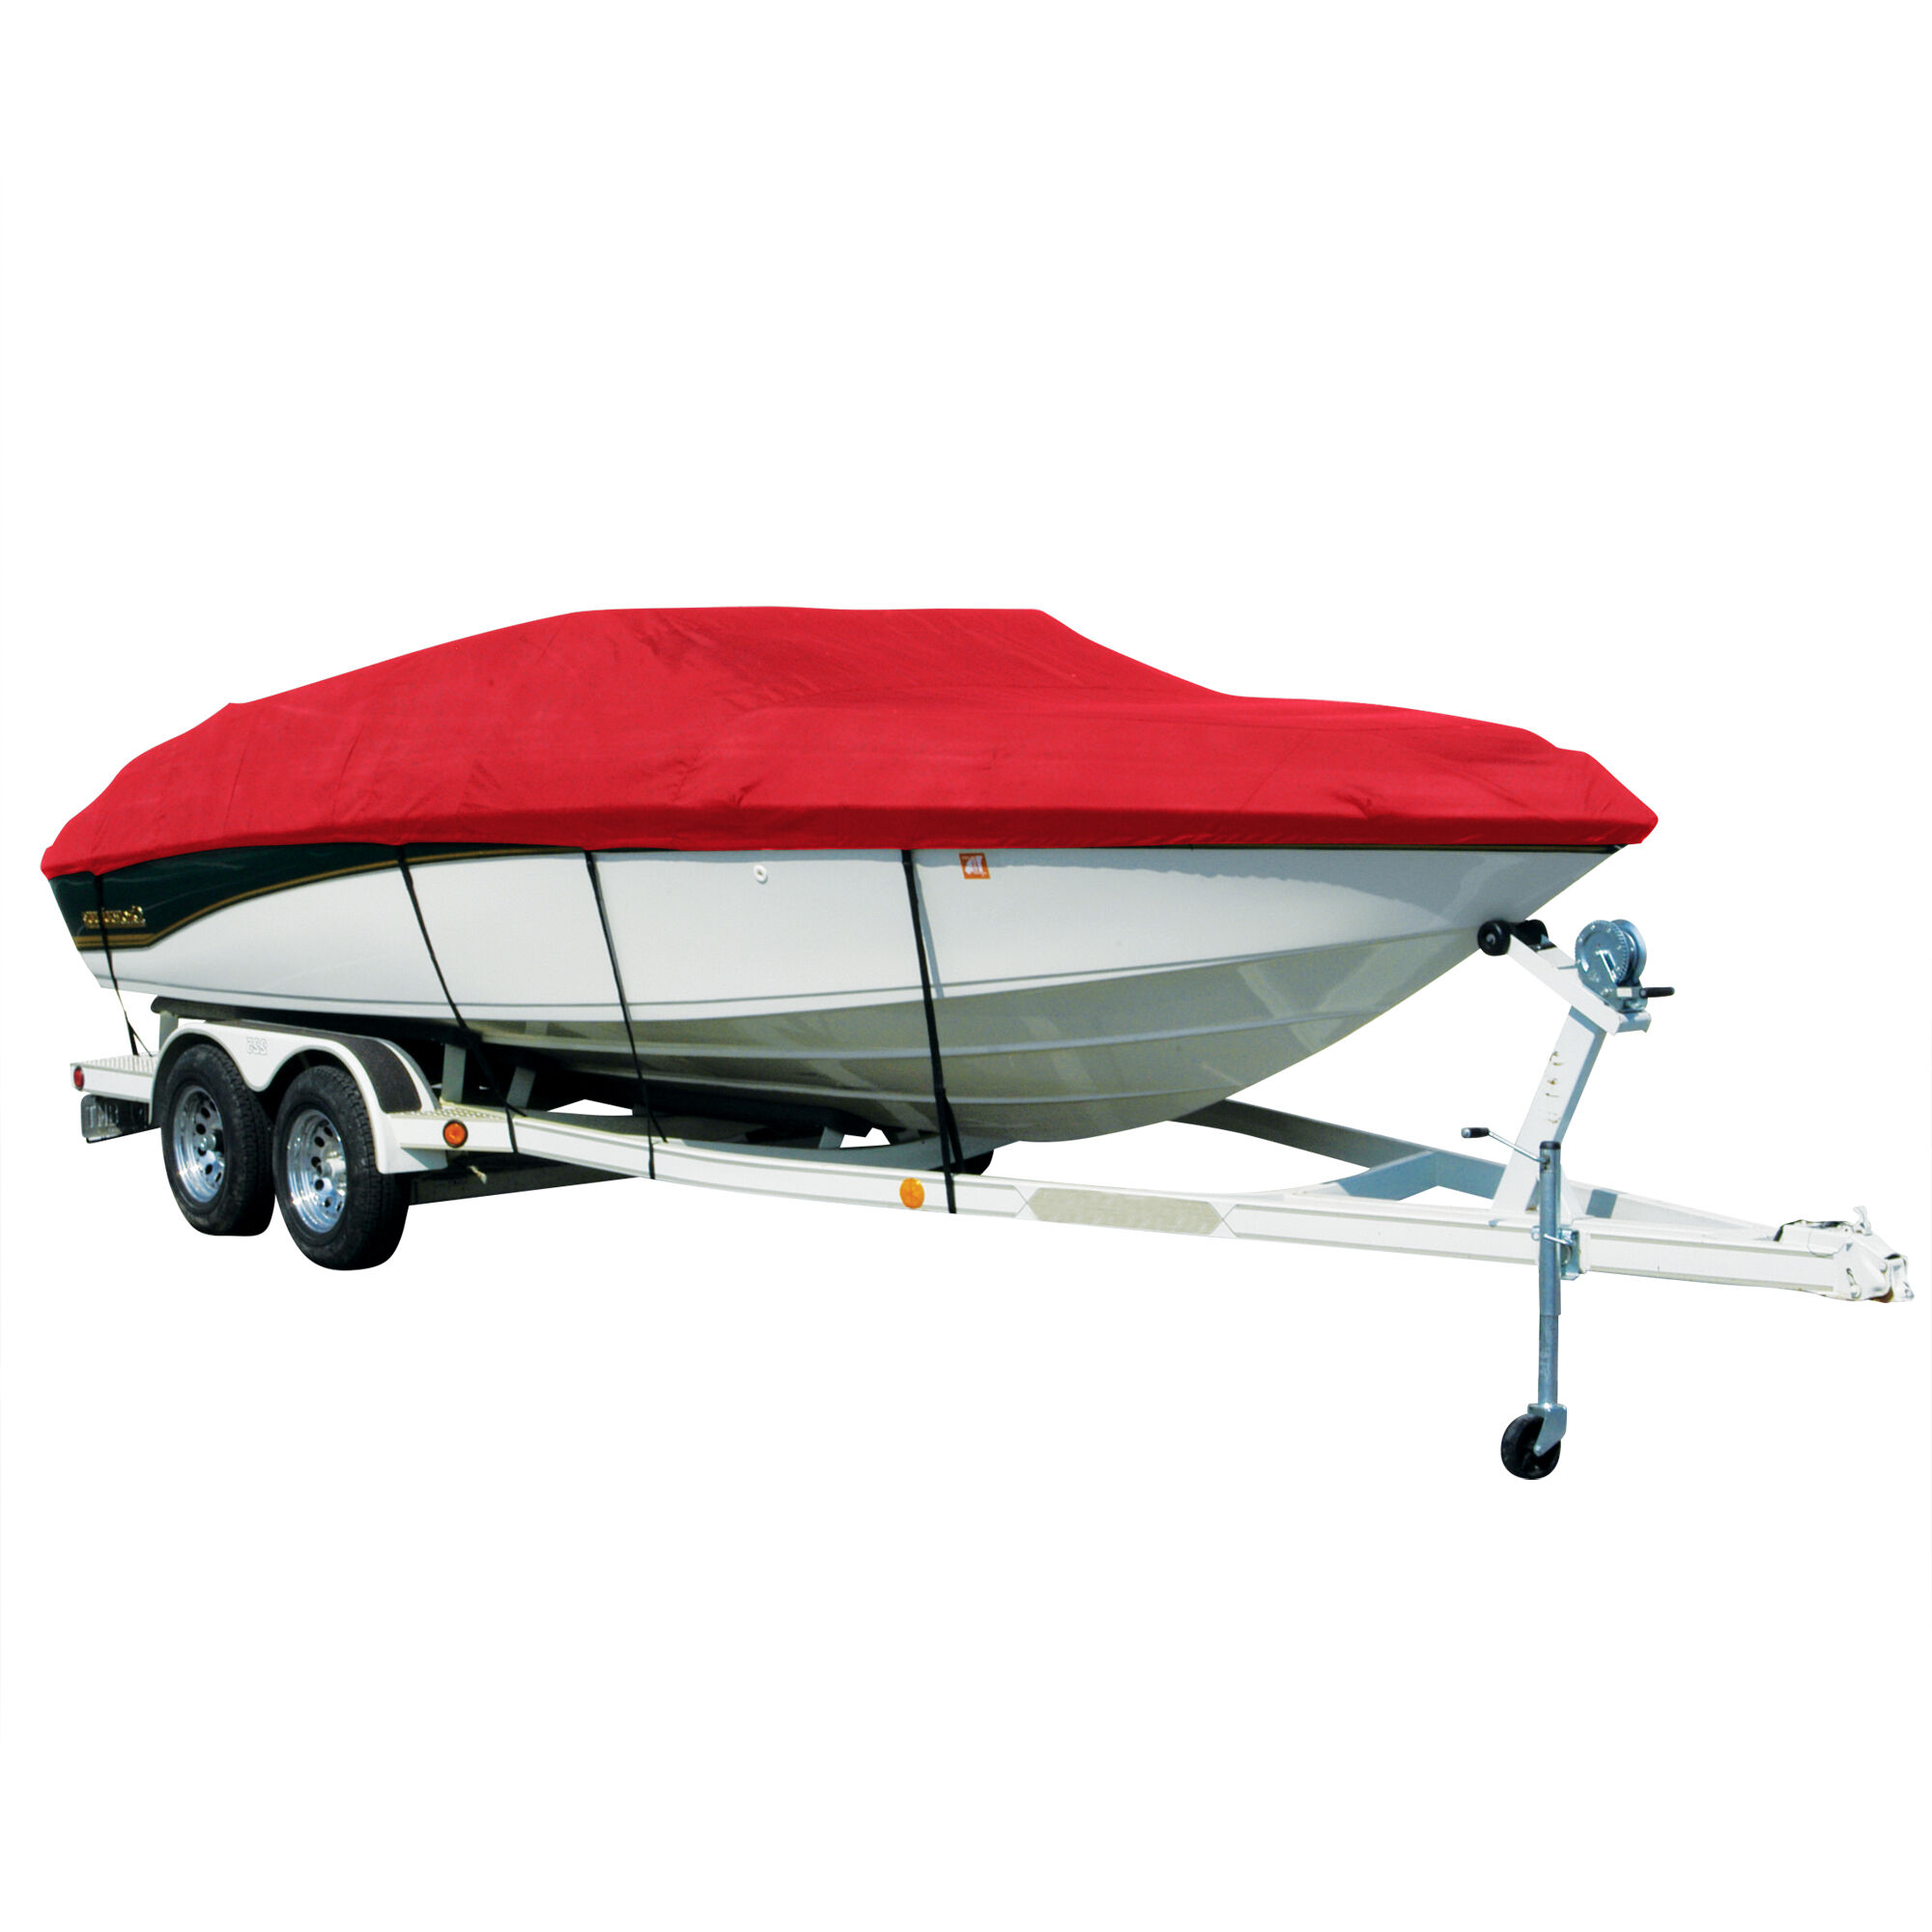 Covermate Exact Fit Sharkskin Boat Cover For SEA RAY 210 SUNDECK w/ ADD ON SWIM PLATFORMM DOES NOT COVER PLATFORMM in Red